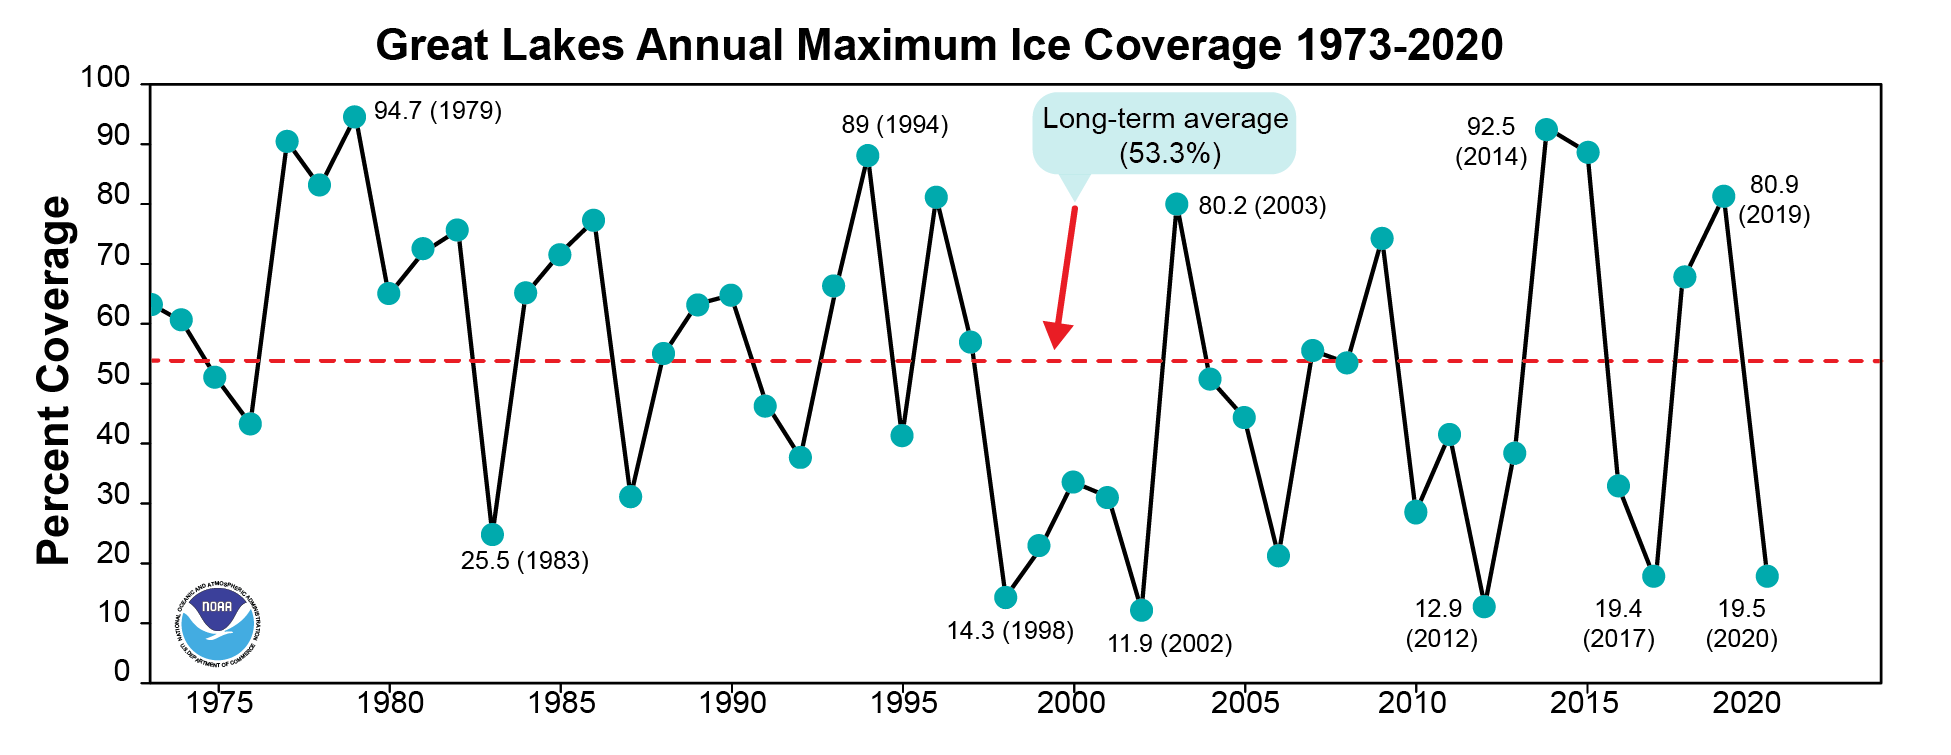 Great Lakes Ice Coverage Averages